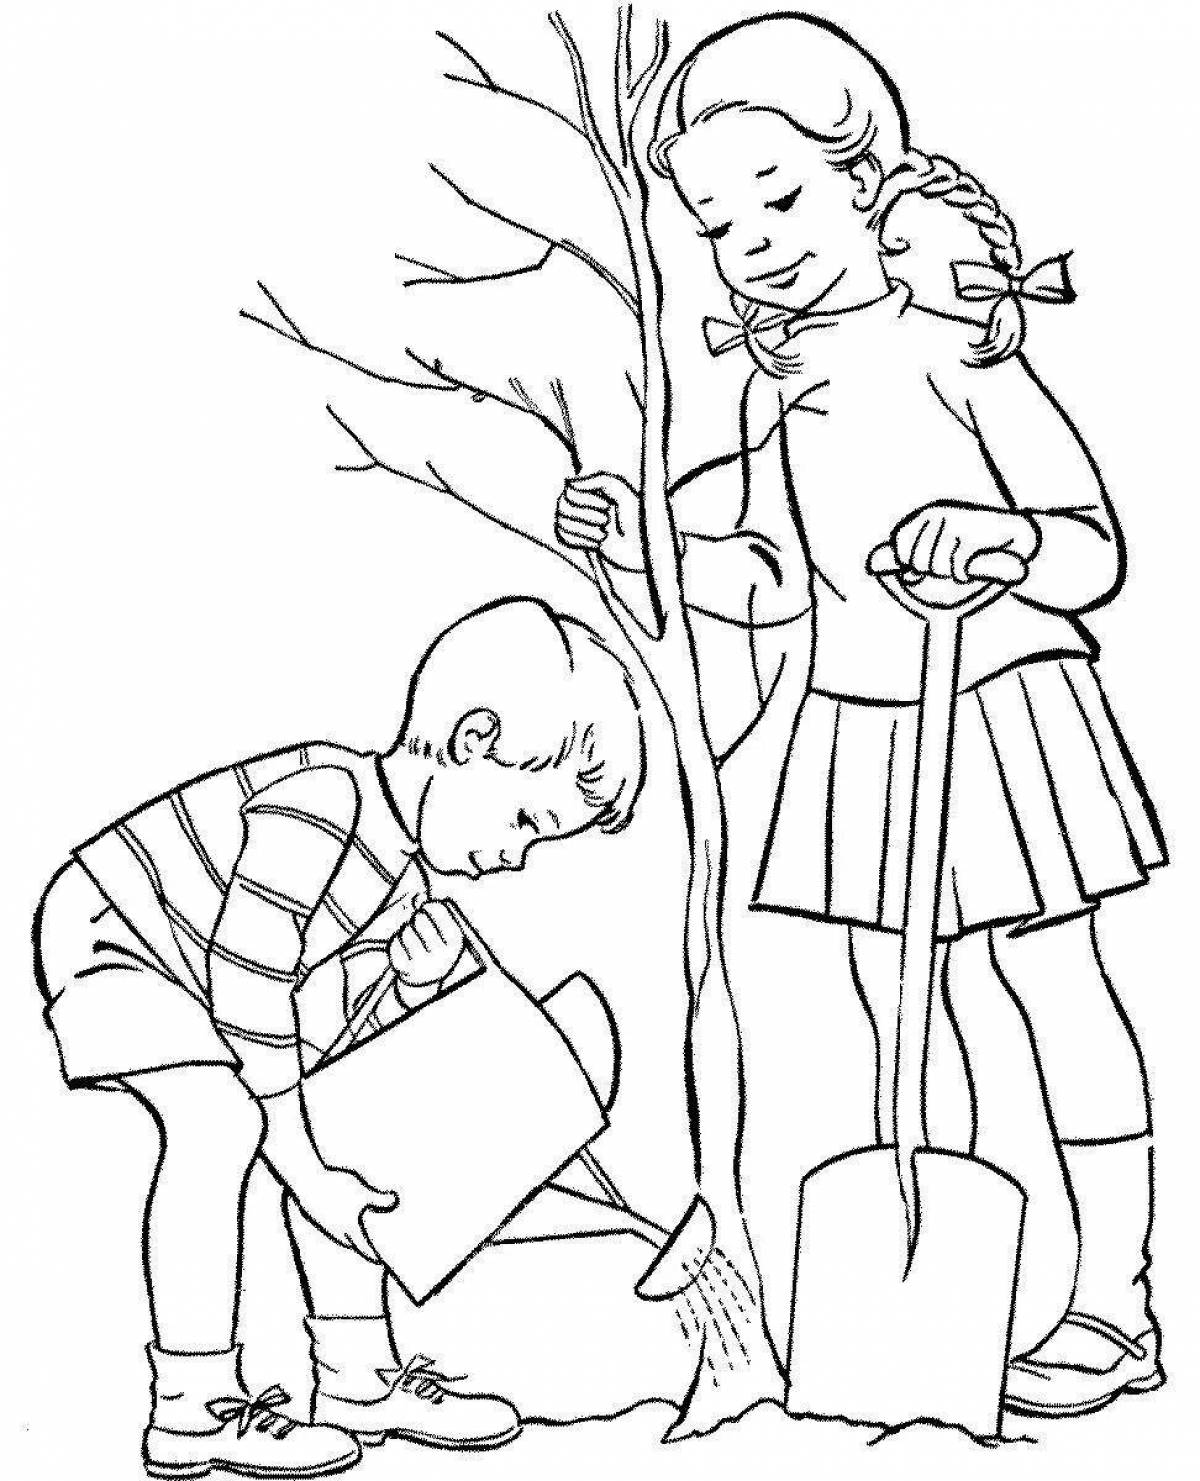 Gorgeous Kindness coloring page